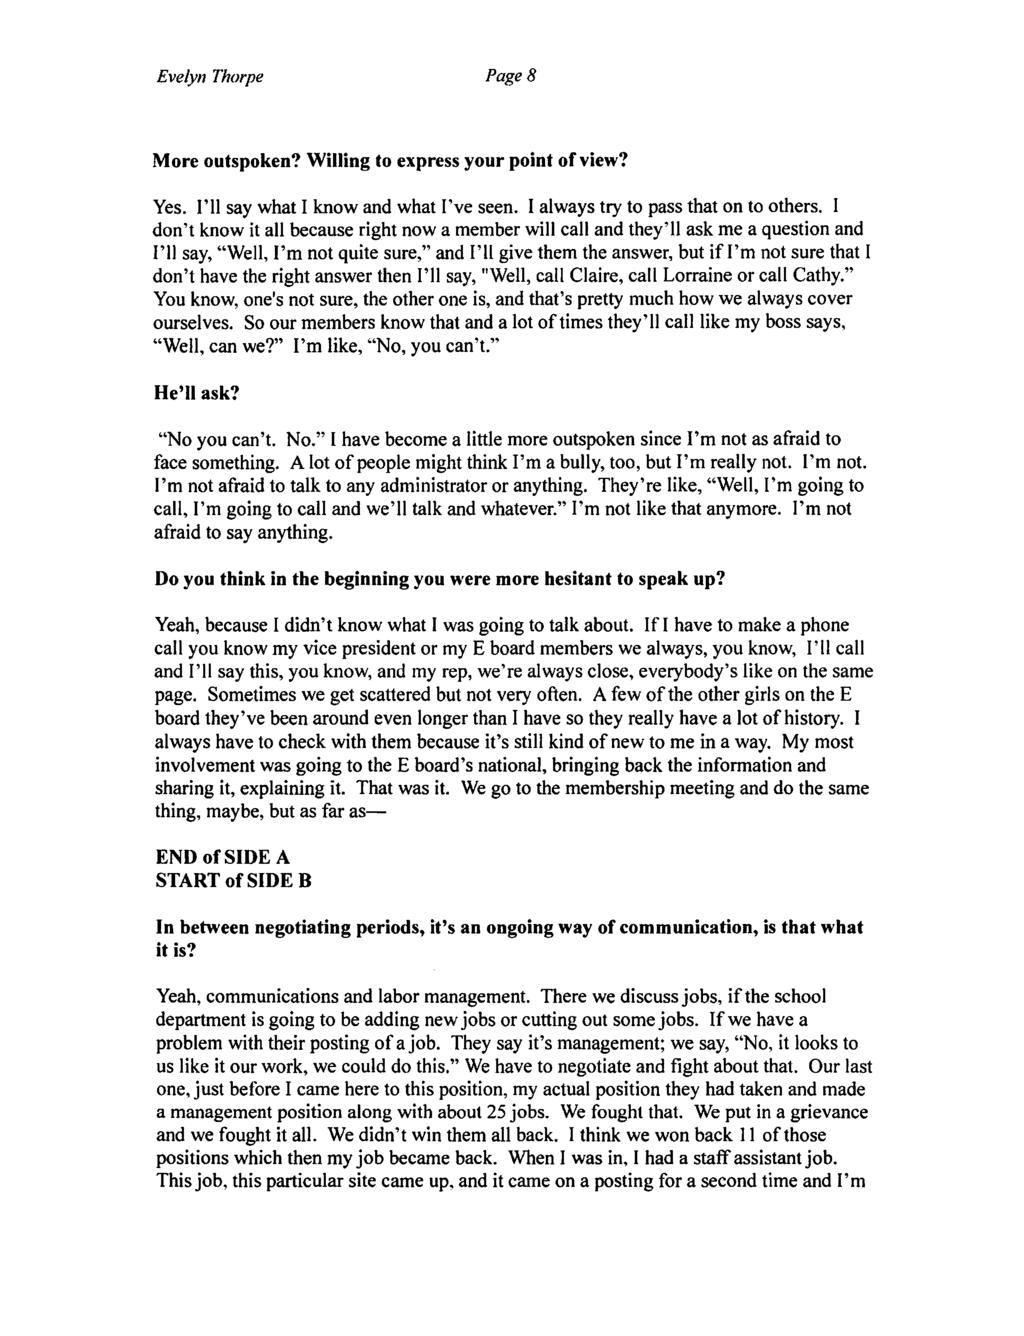 Evelyn Thorpe Page 8 More outspoken? Willing to express your point of view? Yes. I'll say what I know and what I've seen. I always try to pass that on to others.